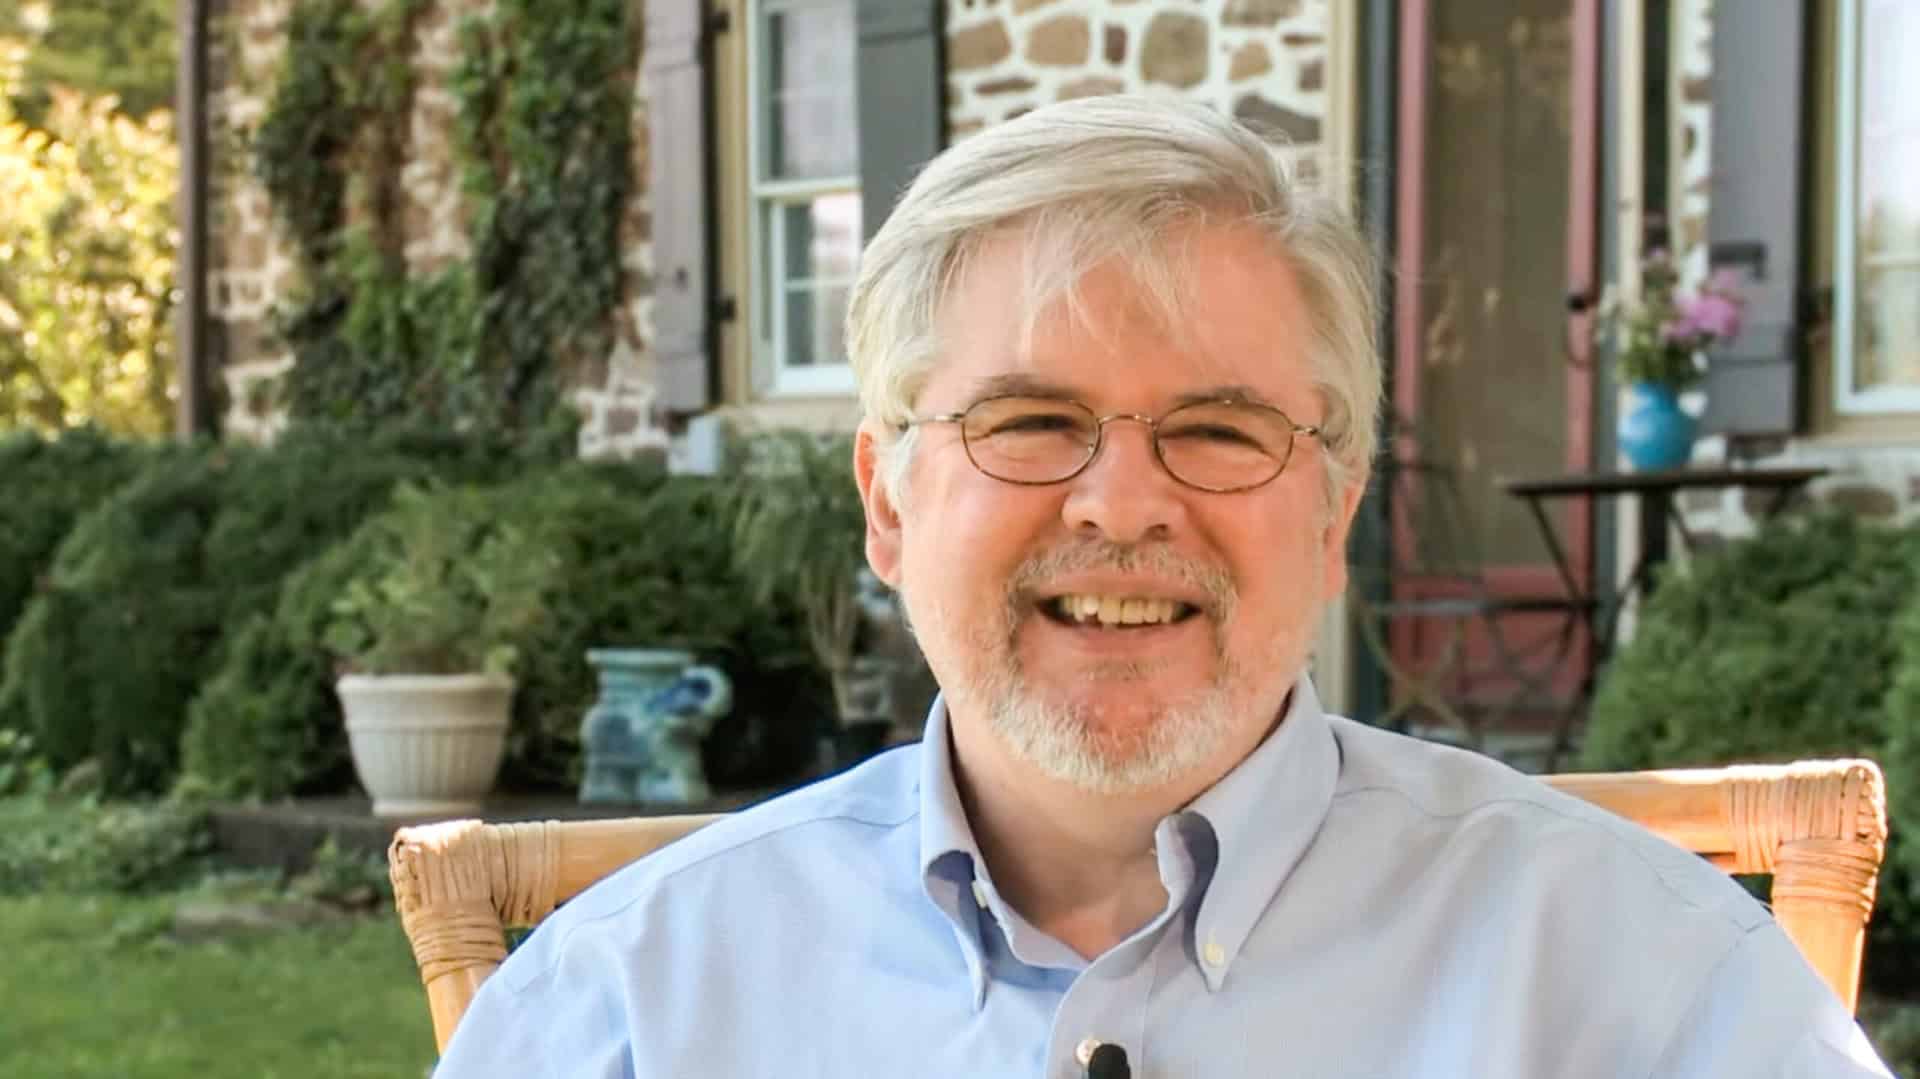 Playwright Christopher Durang